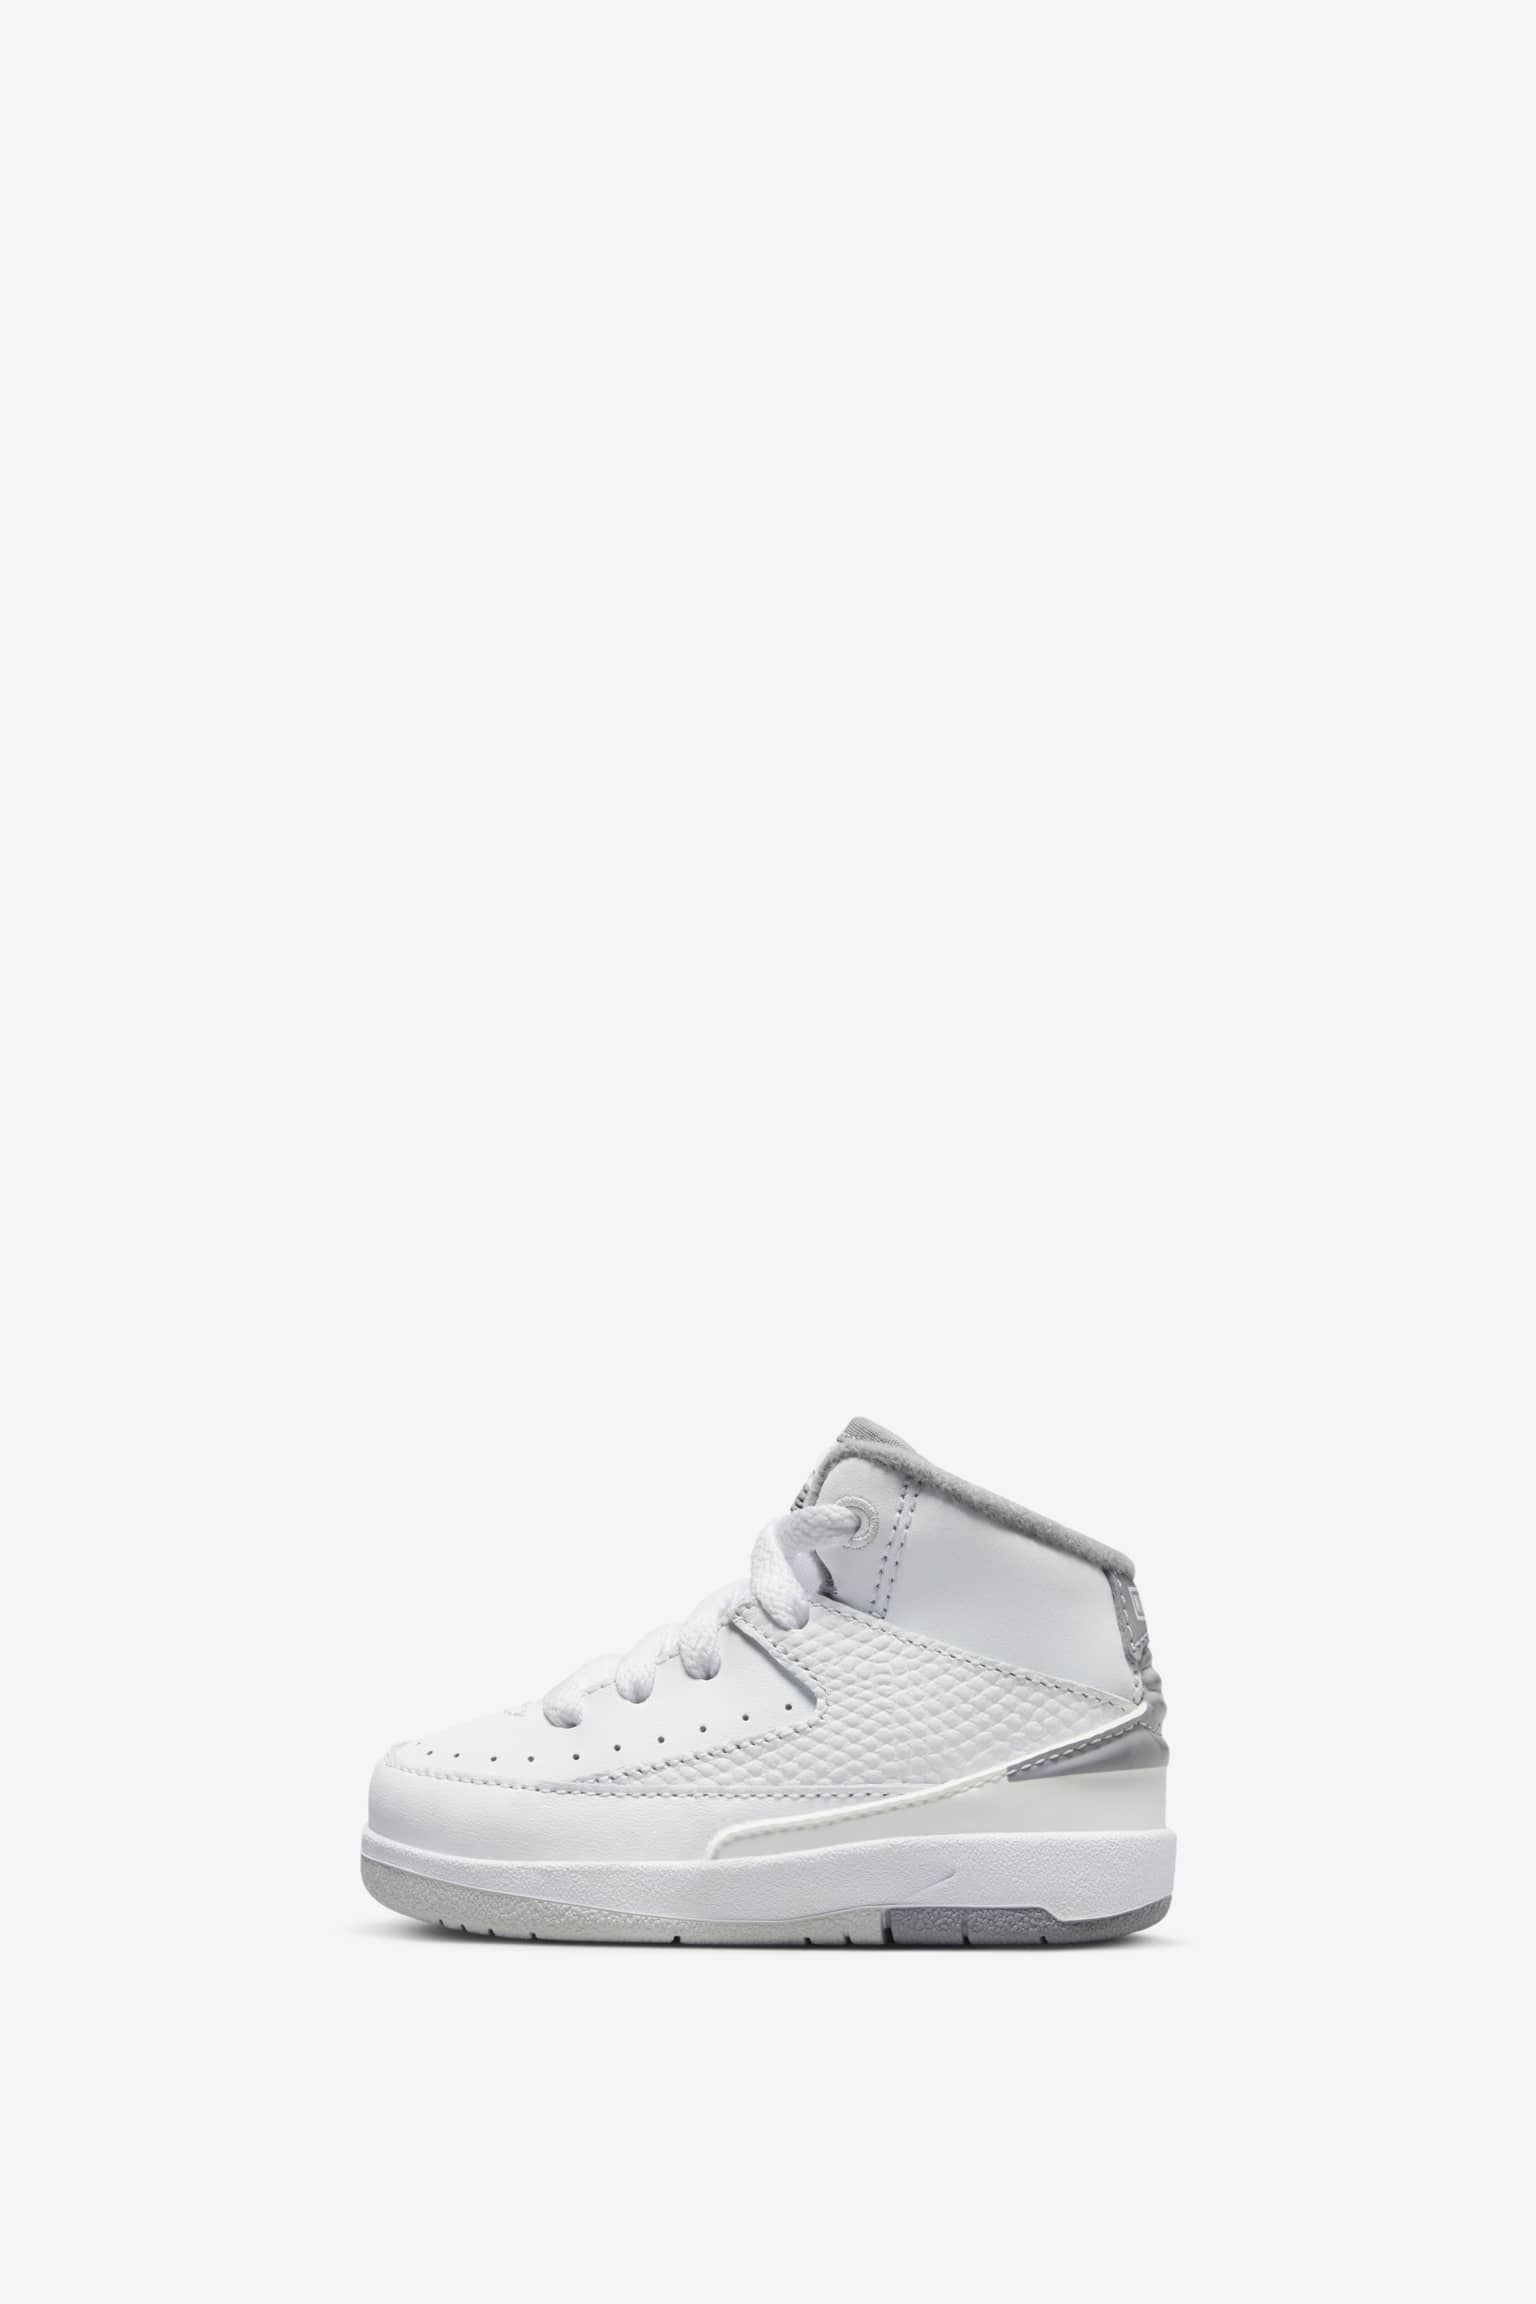 Air Jordan 2 'White and Cement Grey' (DR8884-100) Release Date